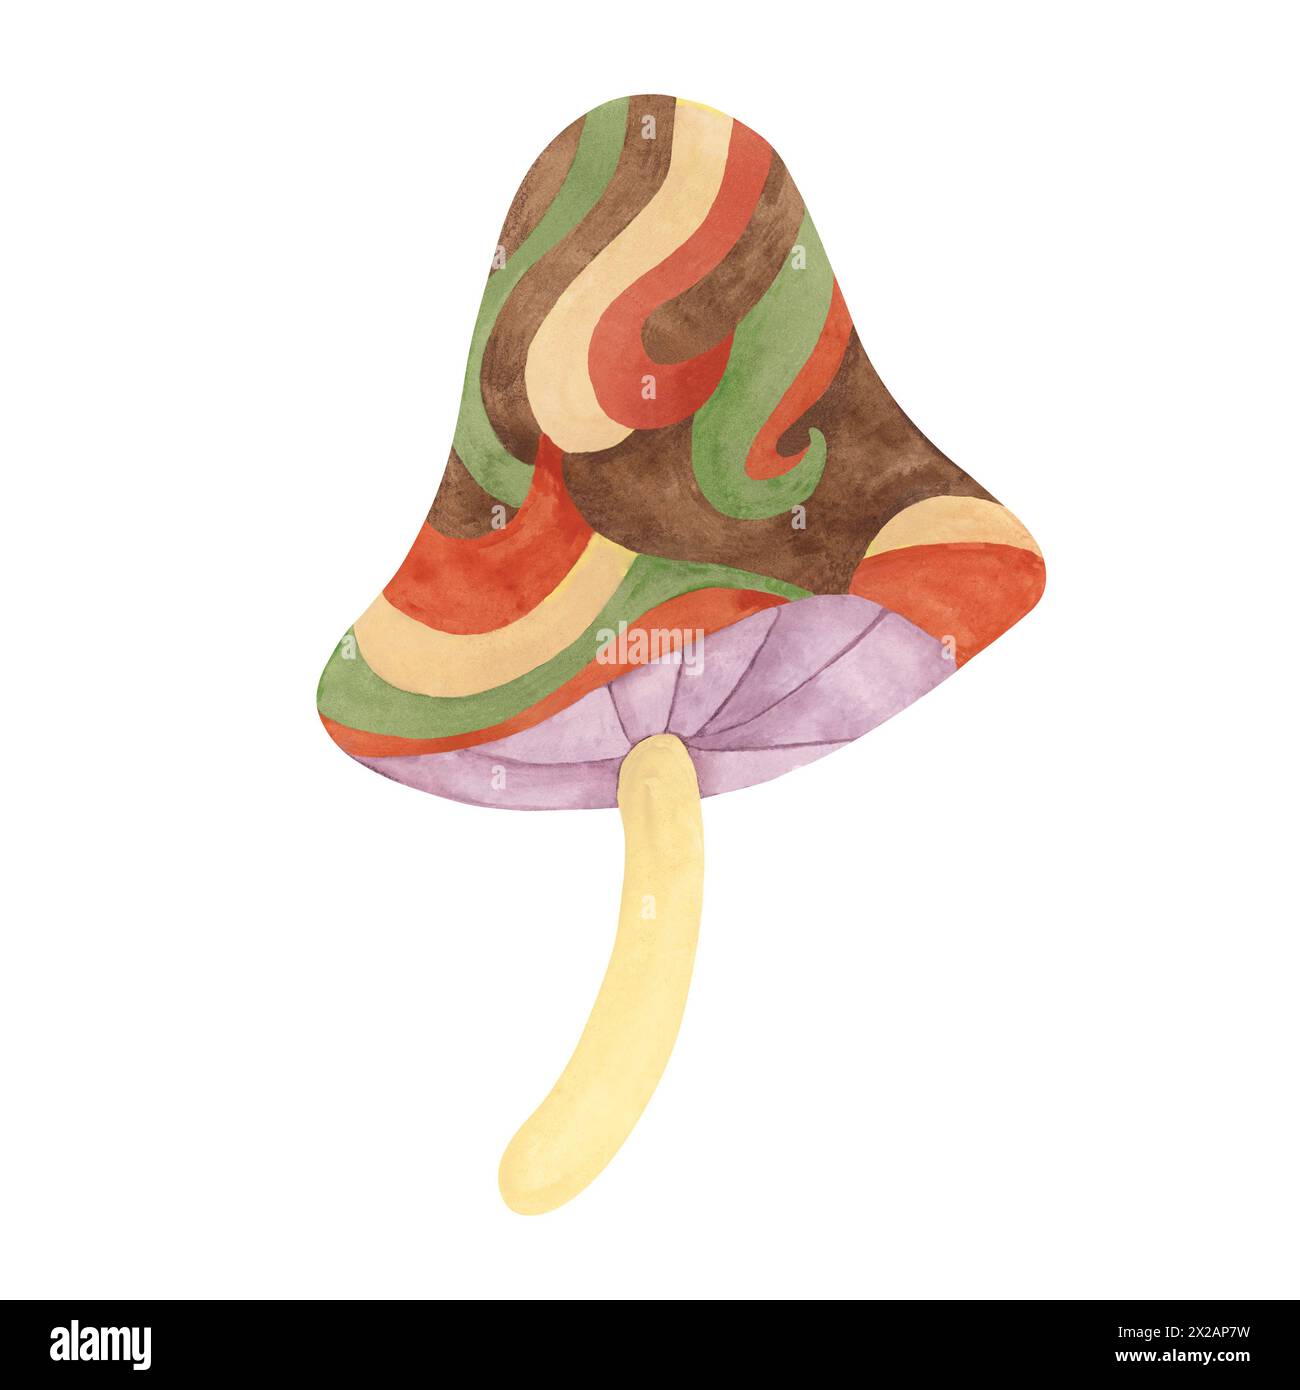 Hippie psychedelic magic mushroom in 70s style. Vintage groovy toadstool nostalgic clipart. Watercolor fairytale fungus funky illustration for printing, trippy stickers, flyers, indie t-shirts, labels Stock Photo